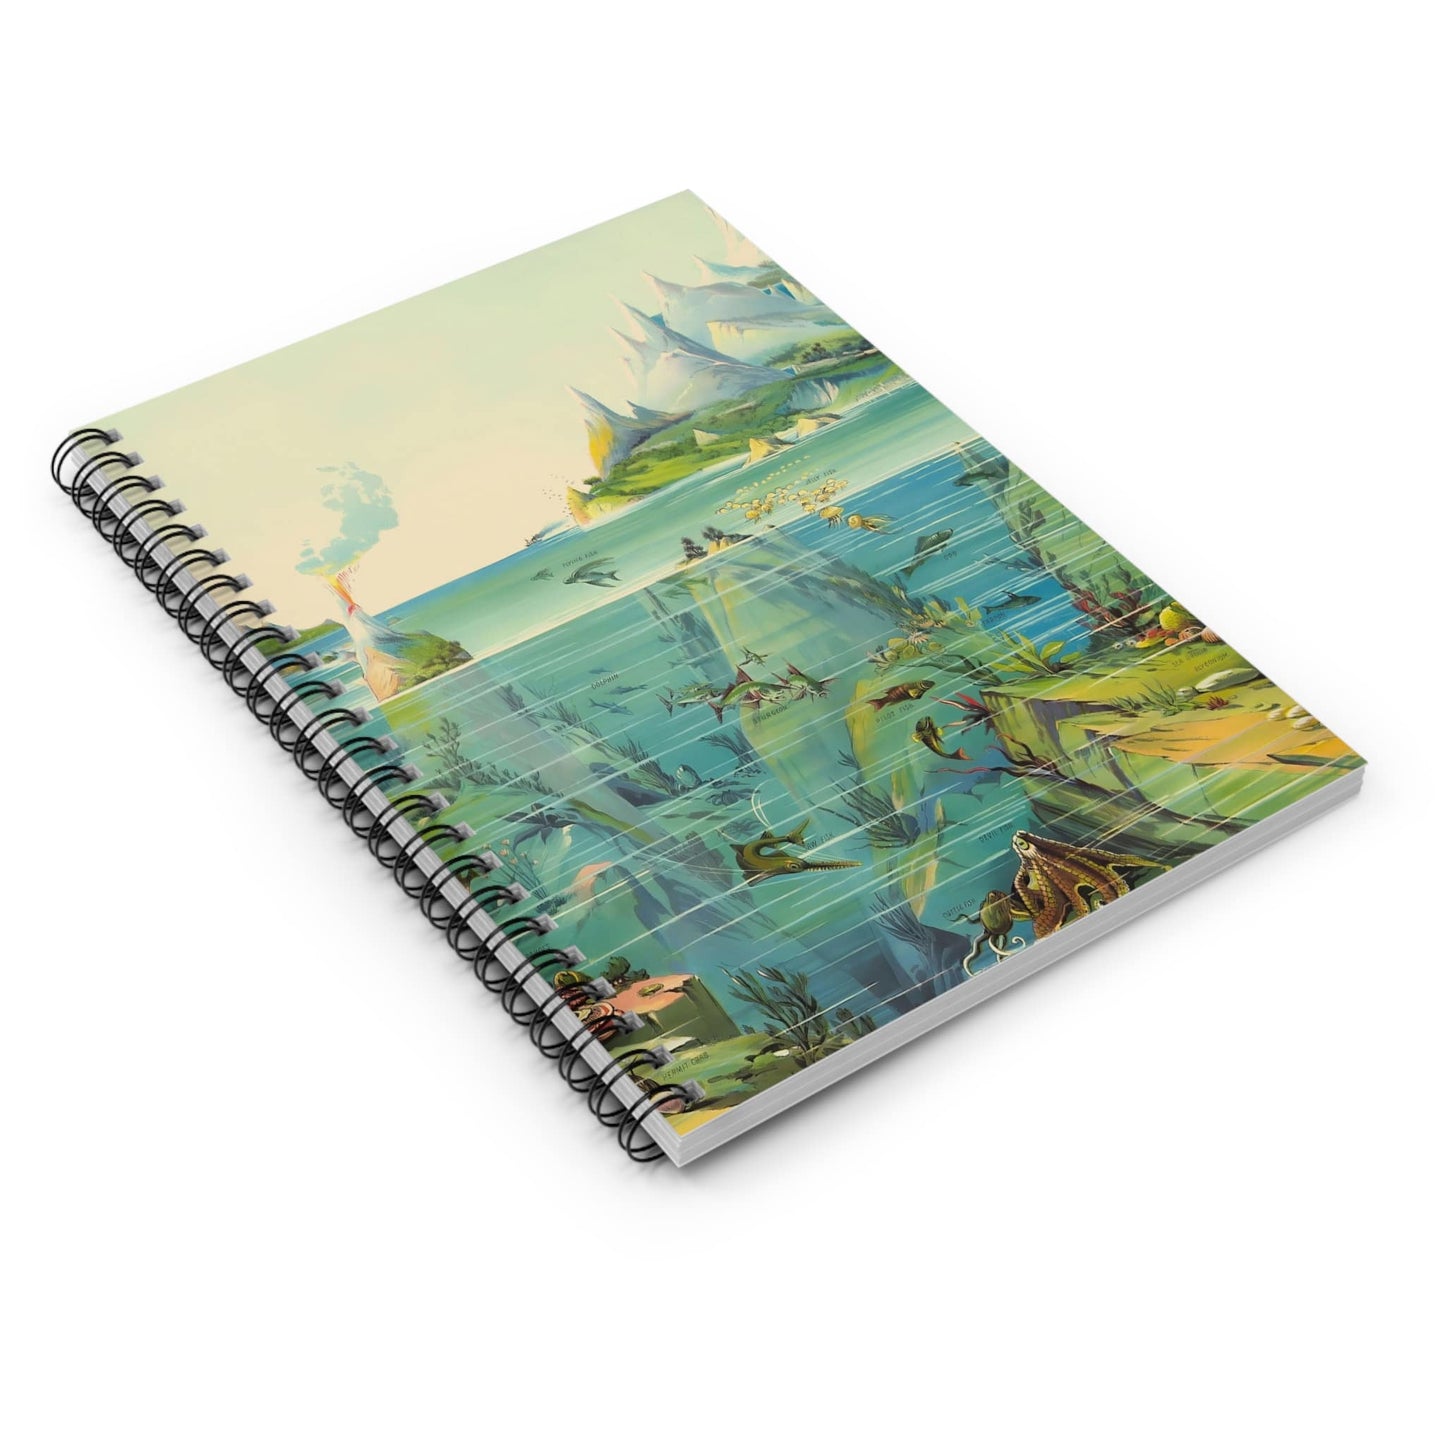 Ocean Spiral Notebook Laying Flat on White Surface